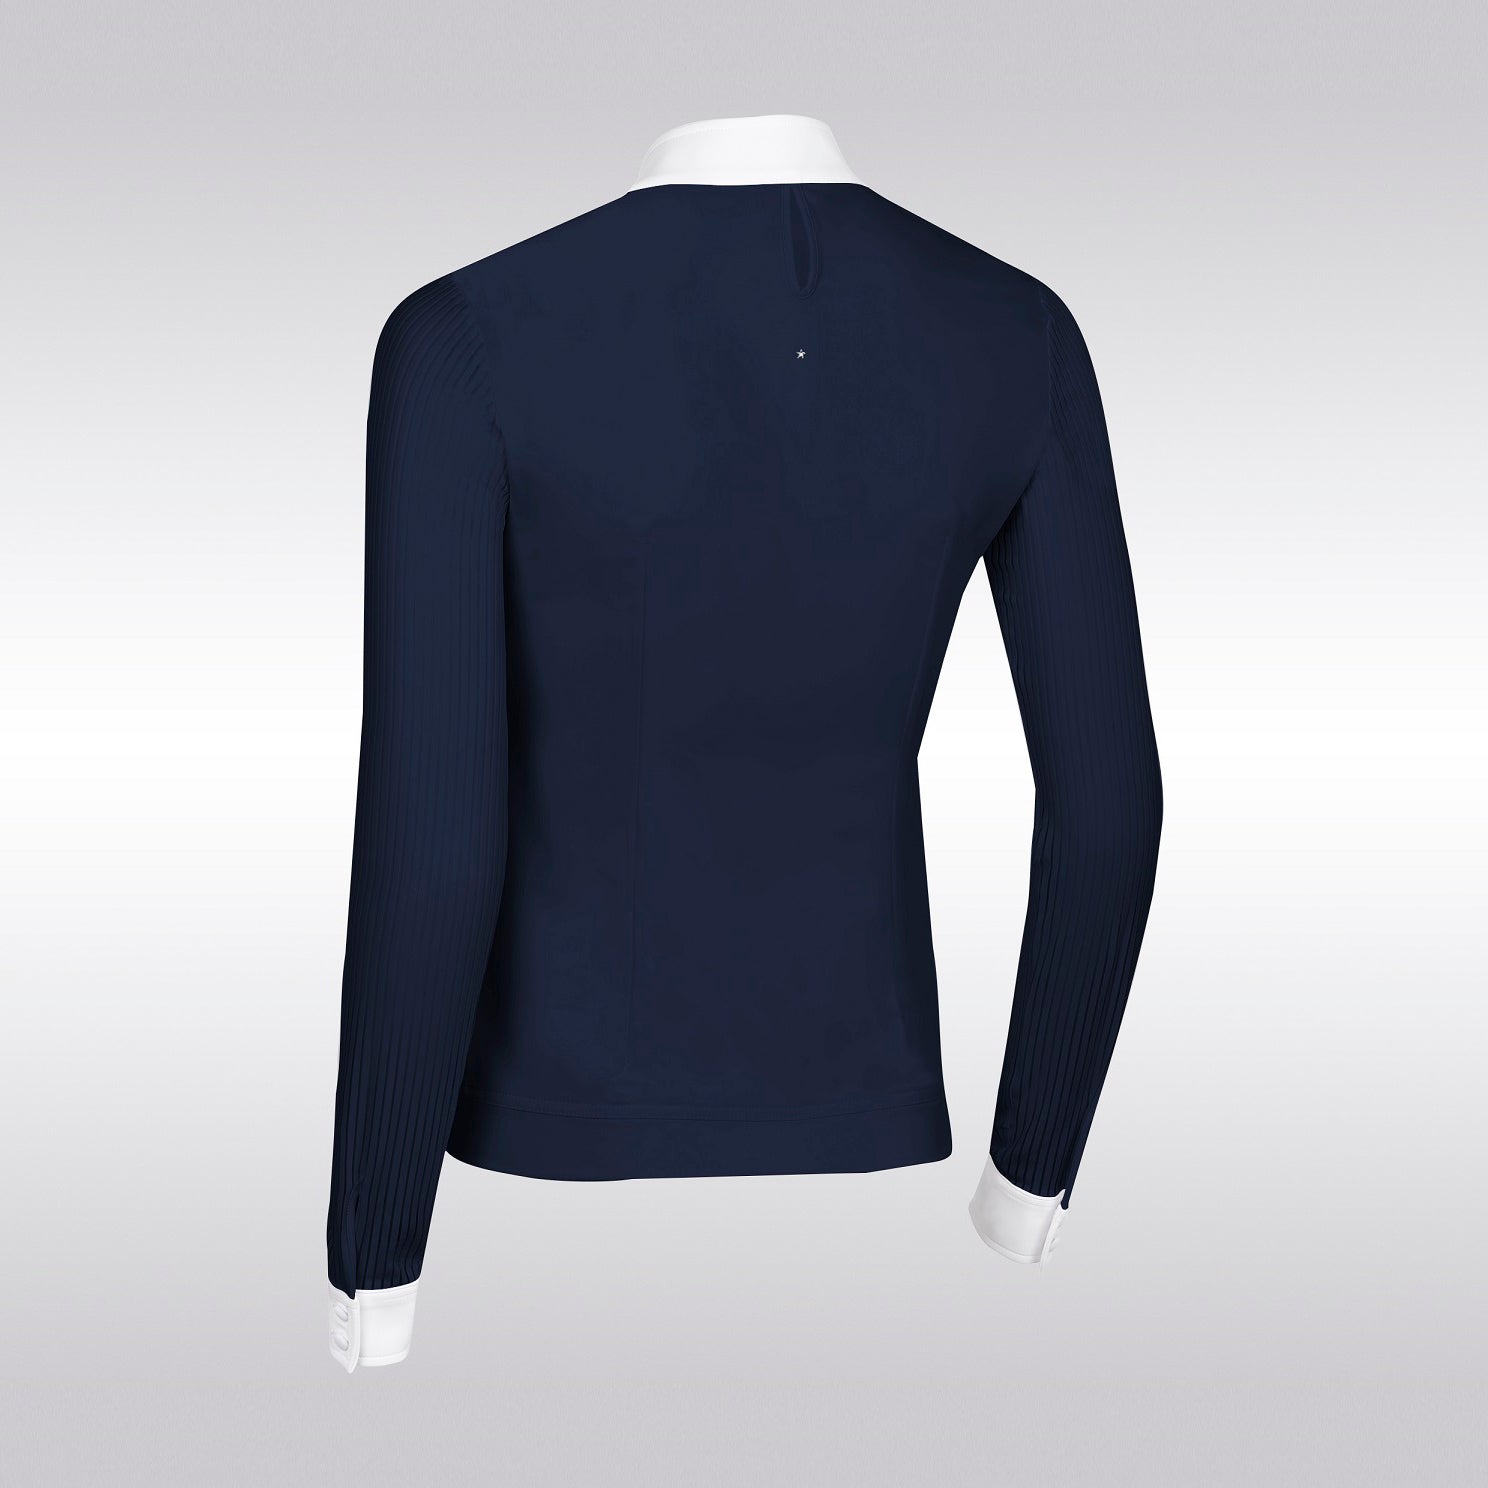 The Samshield Faustine long sleeved competition shirt is designed with a soft, high stretch, breathable fabric. Designed with a striped transparent material on the neckline and sleeves.  Featuring a white collar and cuffs fastened with poppers and completed with the Samshield blazon in Swarovski crystals on the collar.